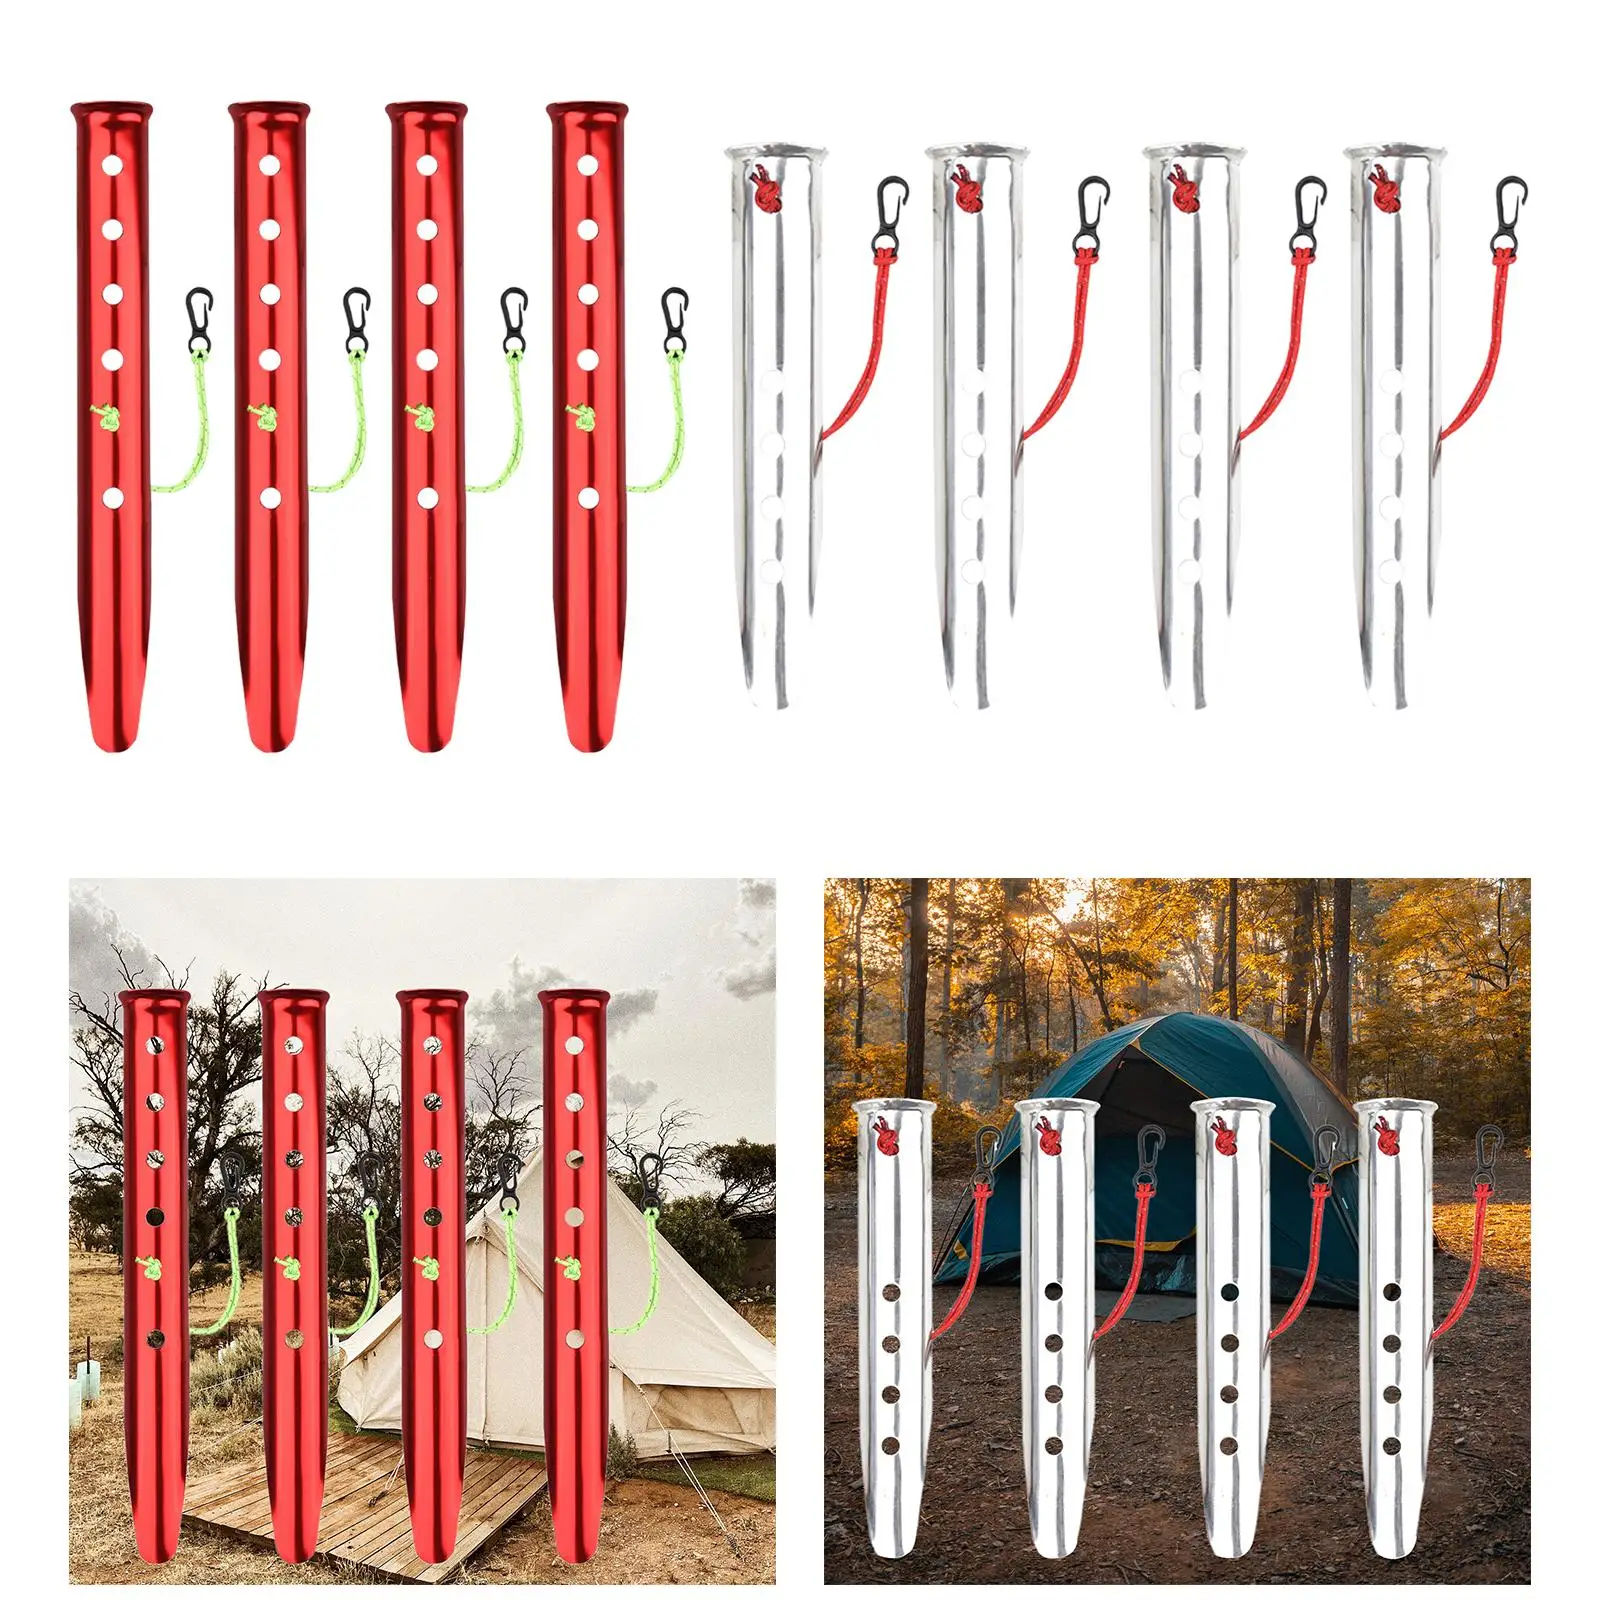 4x Aluminum Alloy Camping Stakes, Peg Ground Anchor U Shaped Camping Pegs Accessories Tent Pegs Tarps Picnic Outdoor